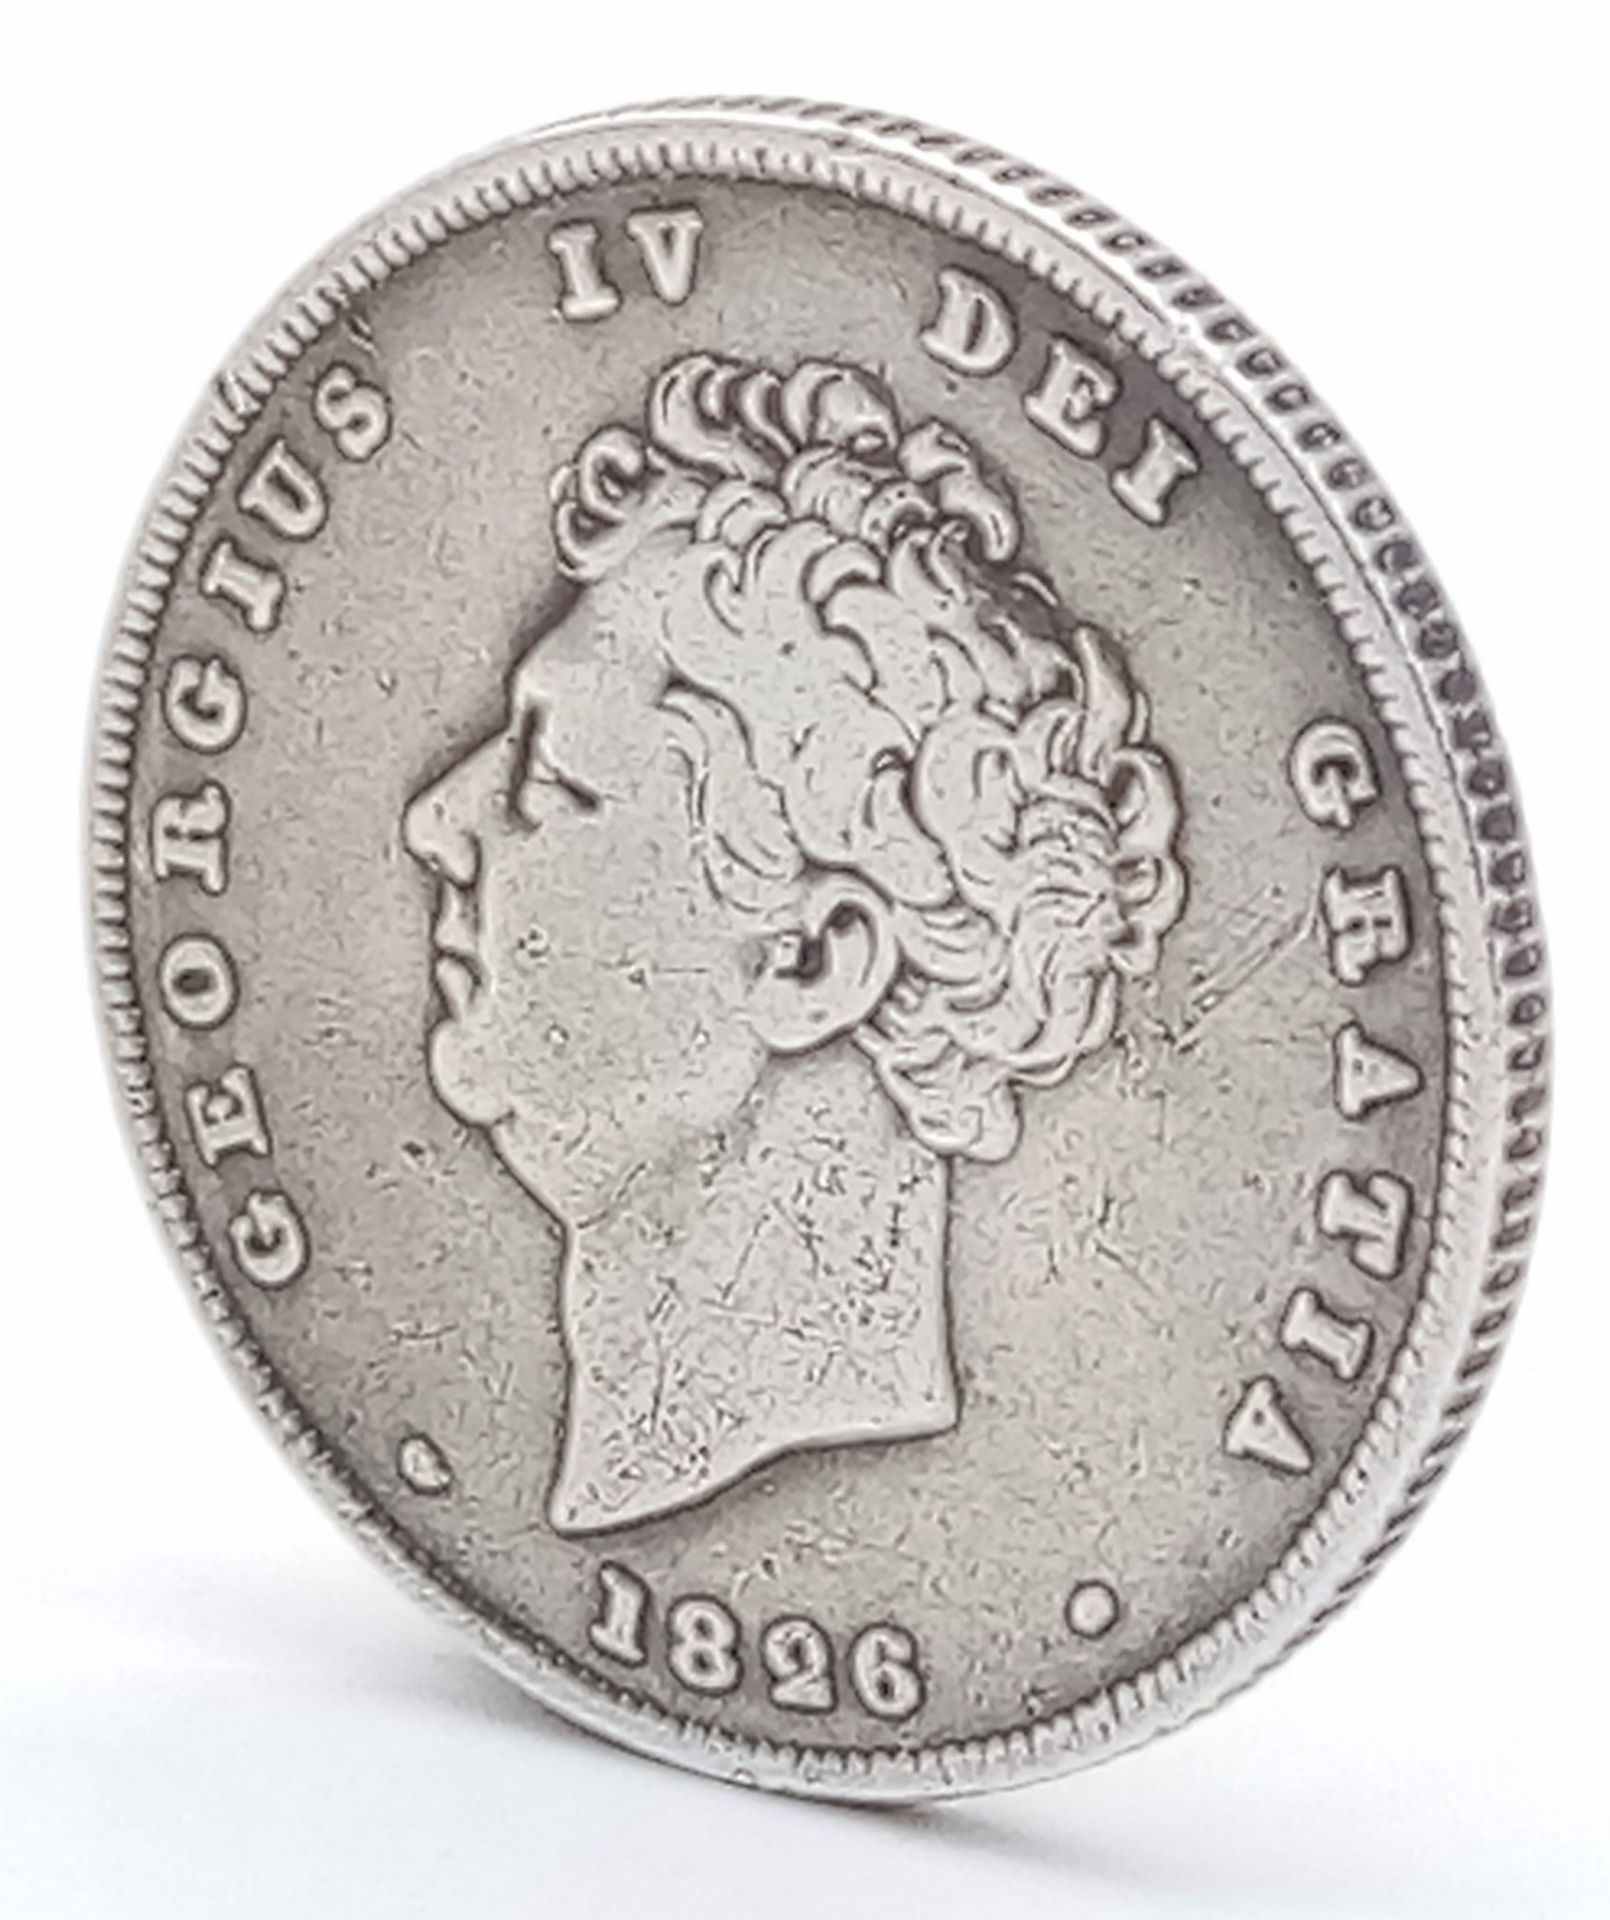 An 1816 George III British Silver Sixpence Coin. A decent grade but please see photos.